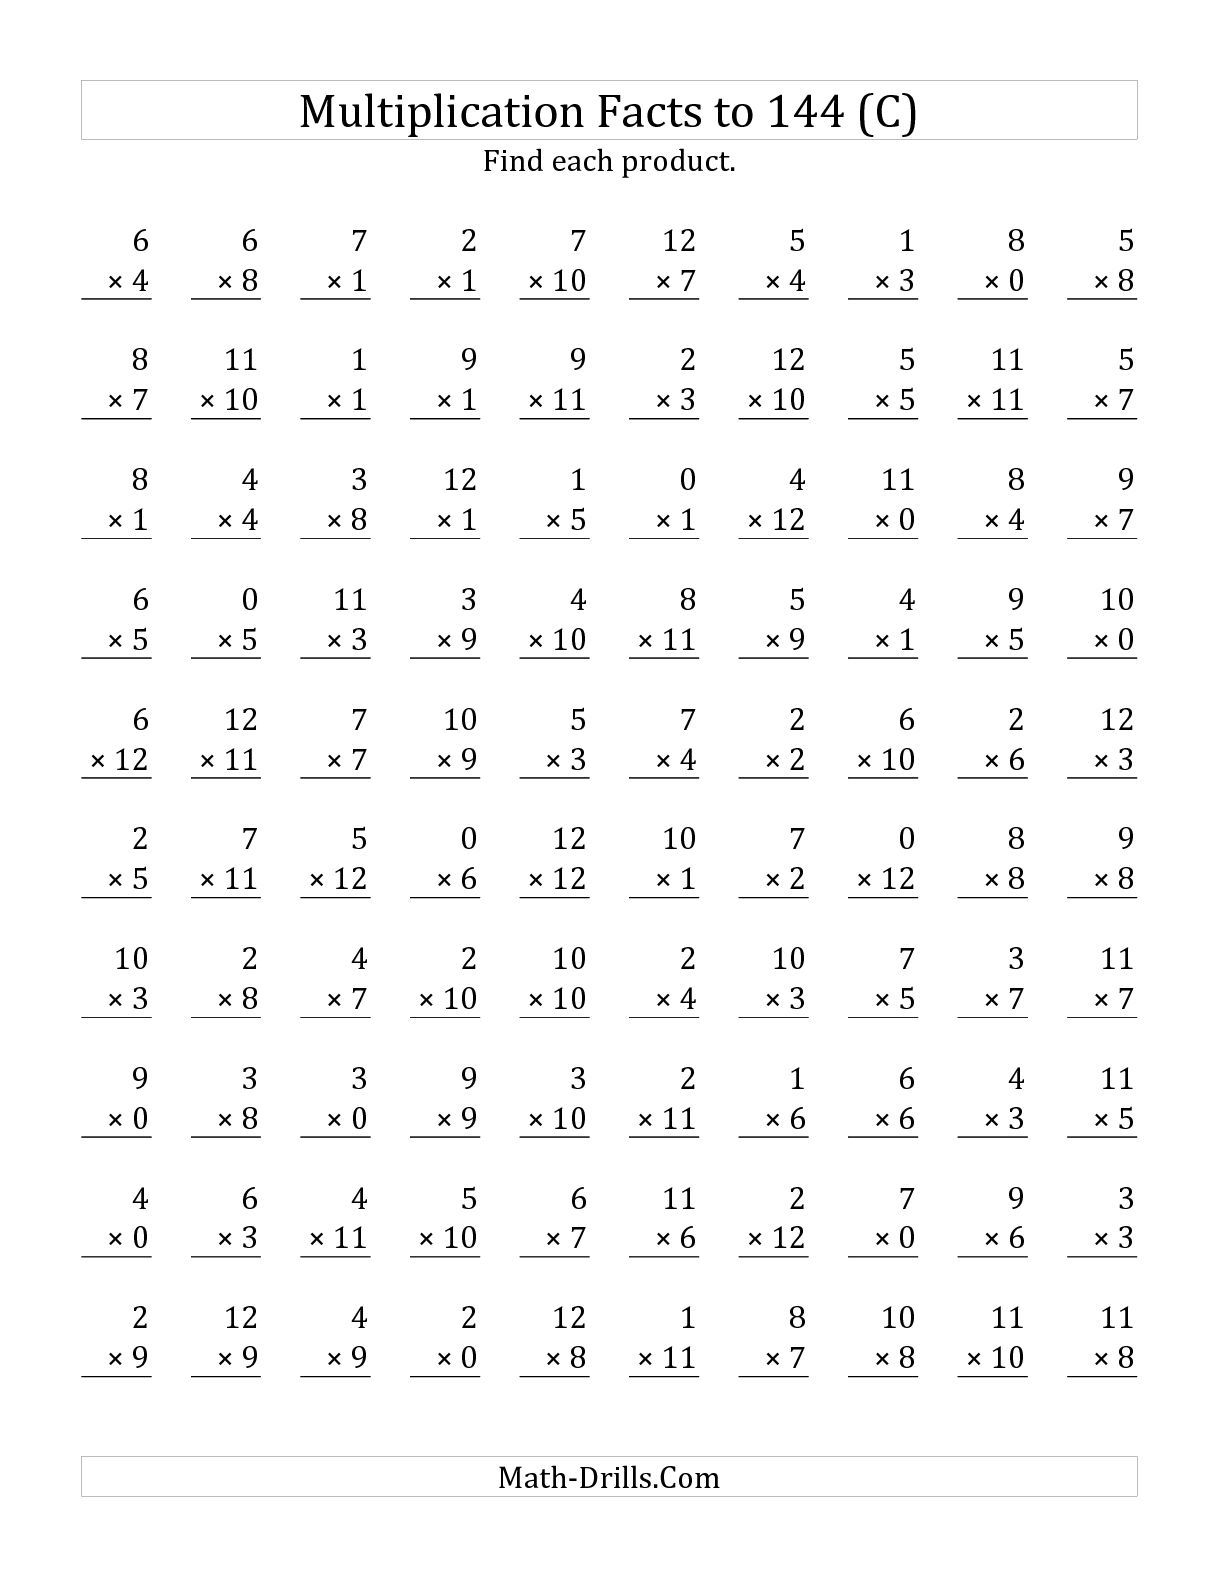 The Multiplication Facts To 144 Including Zeros (C) Math regarding Multiplication Worksheets 5 6 7